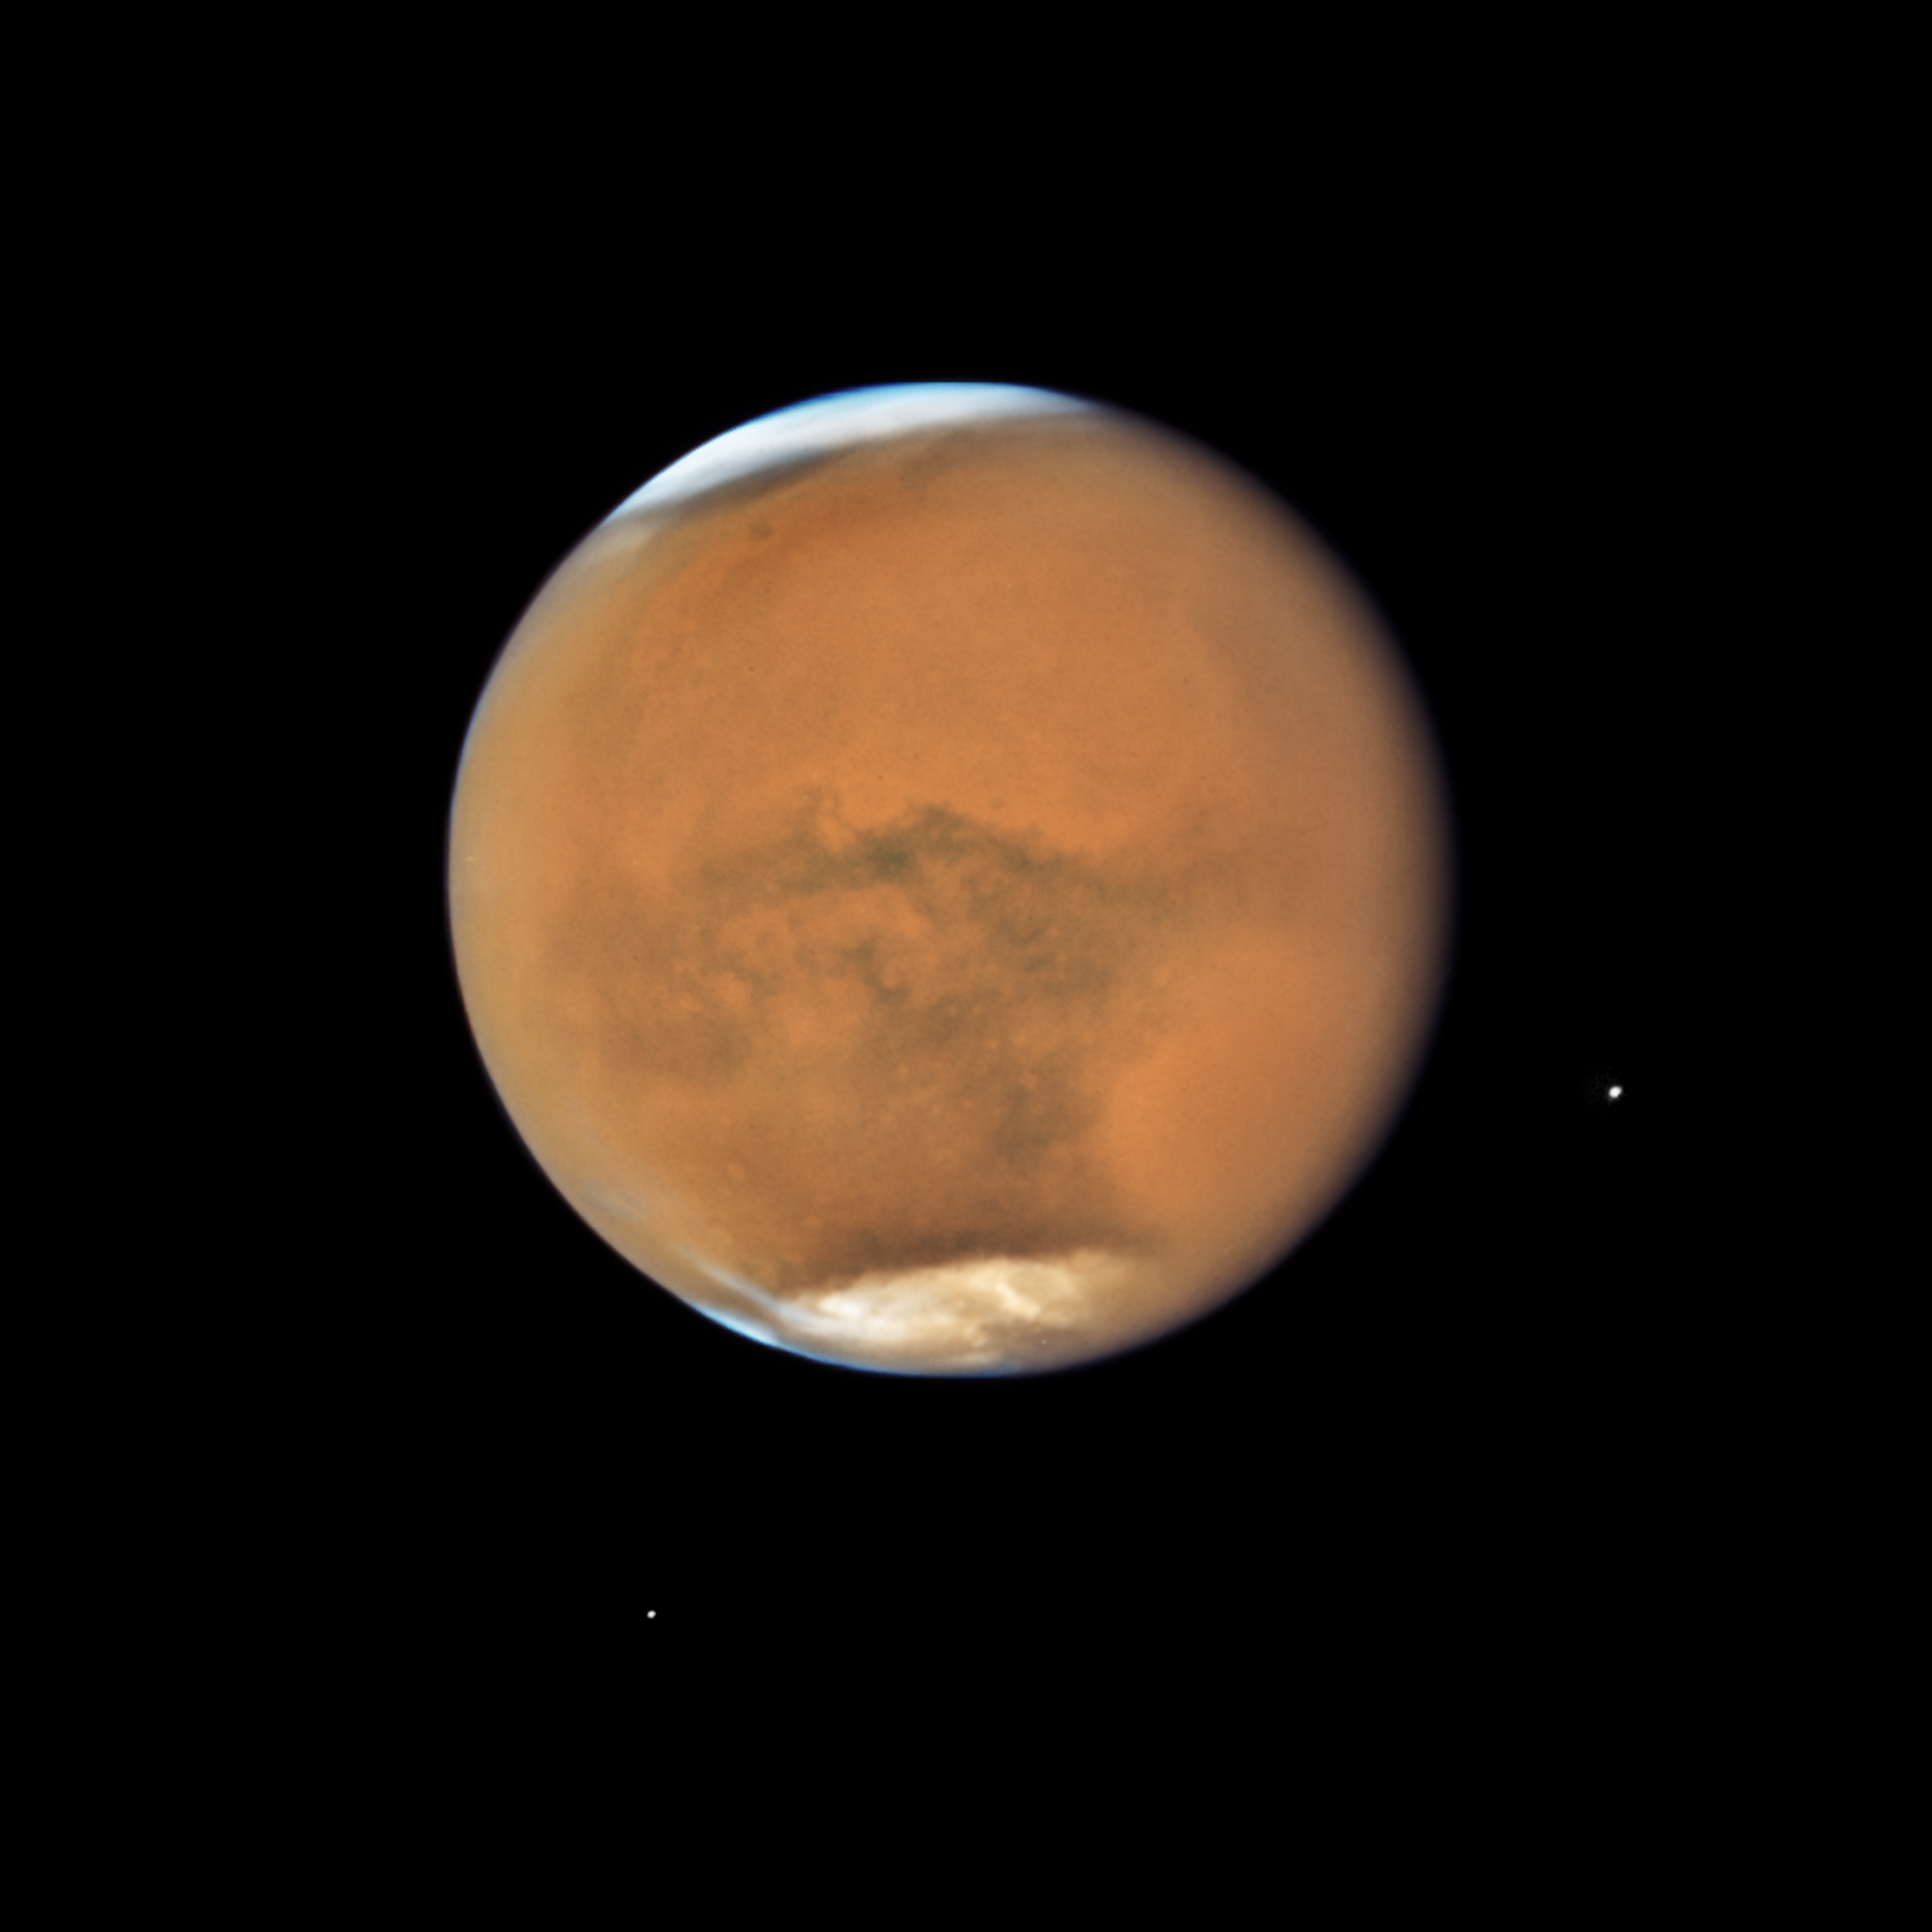 Image of Mars during a dust storm